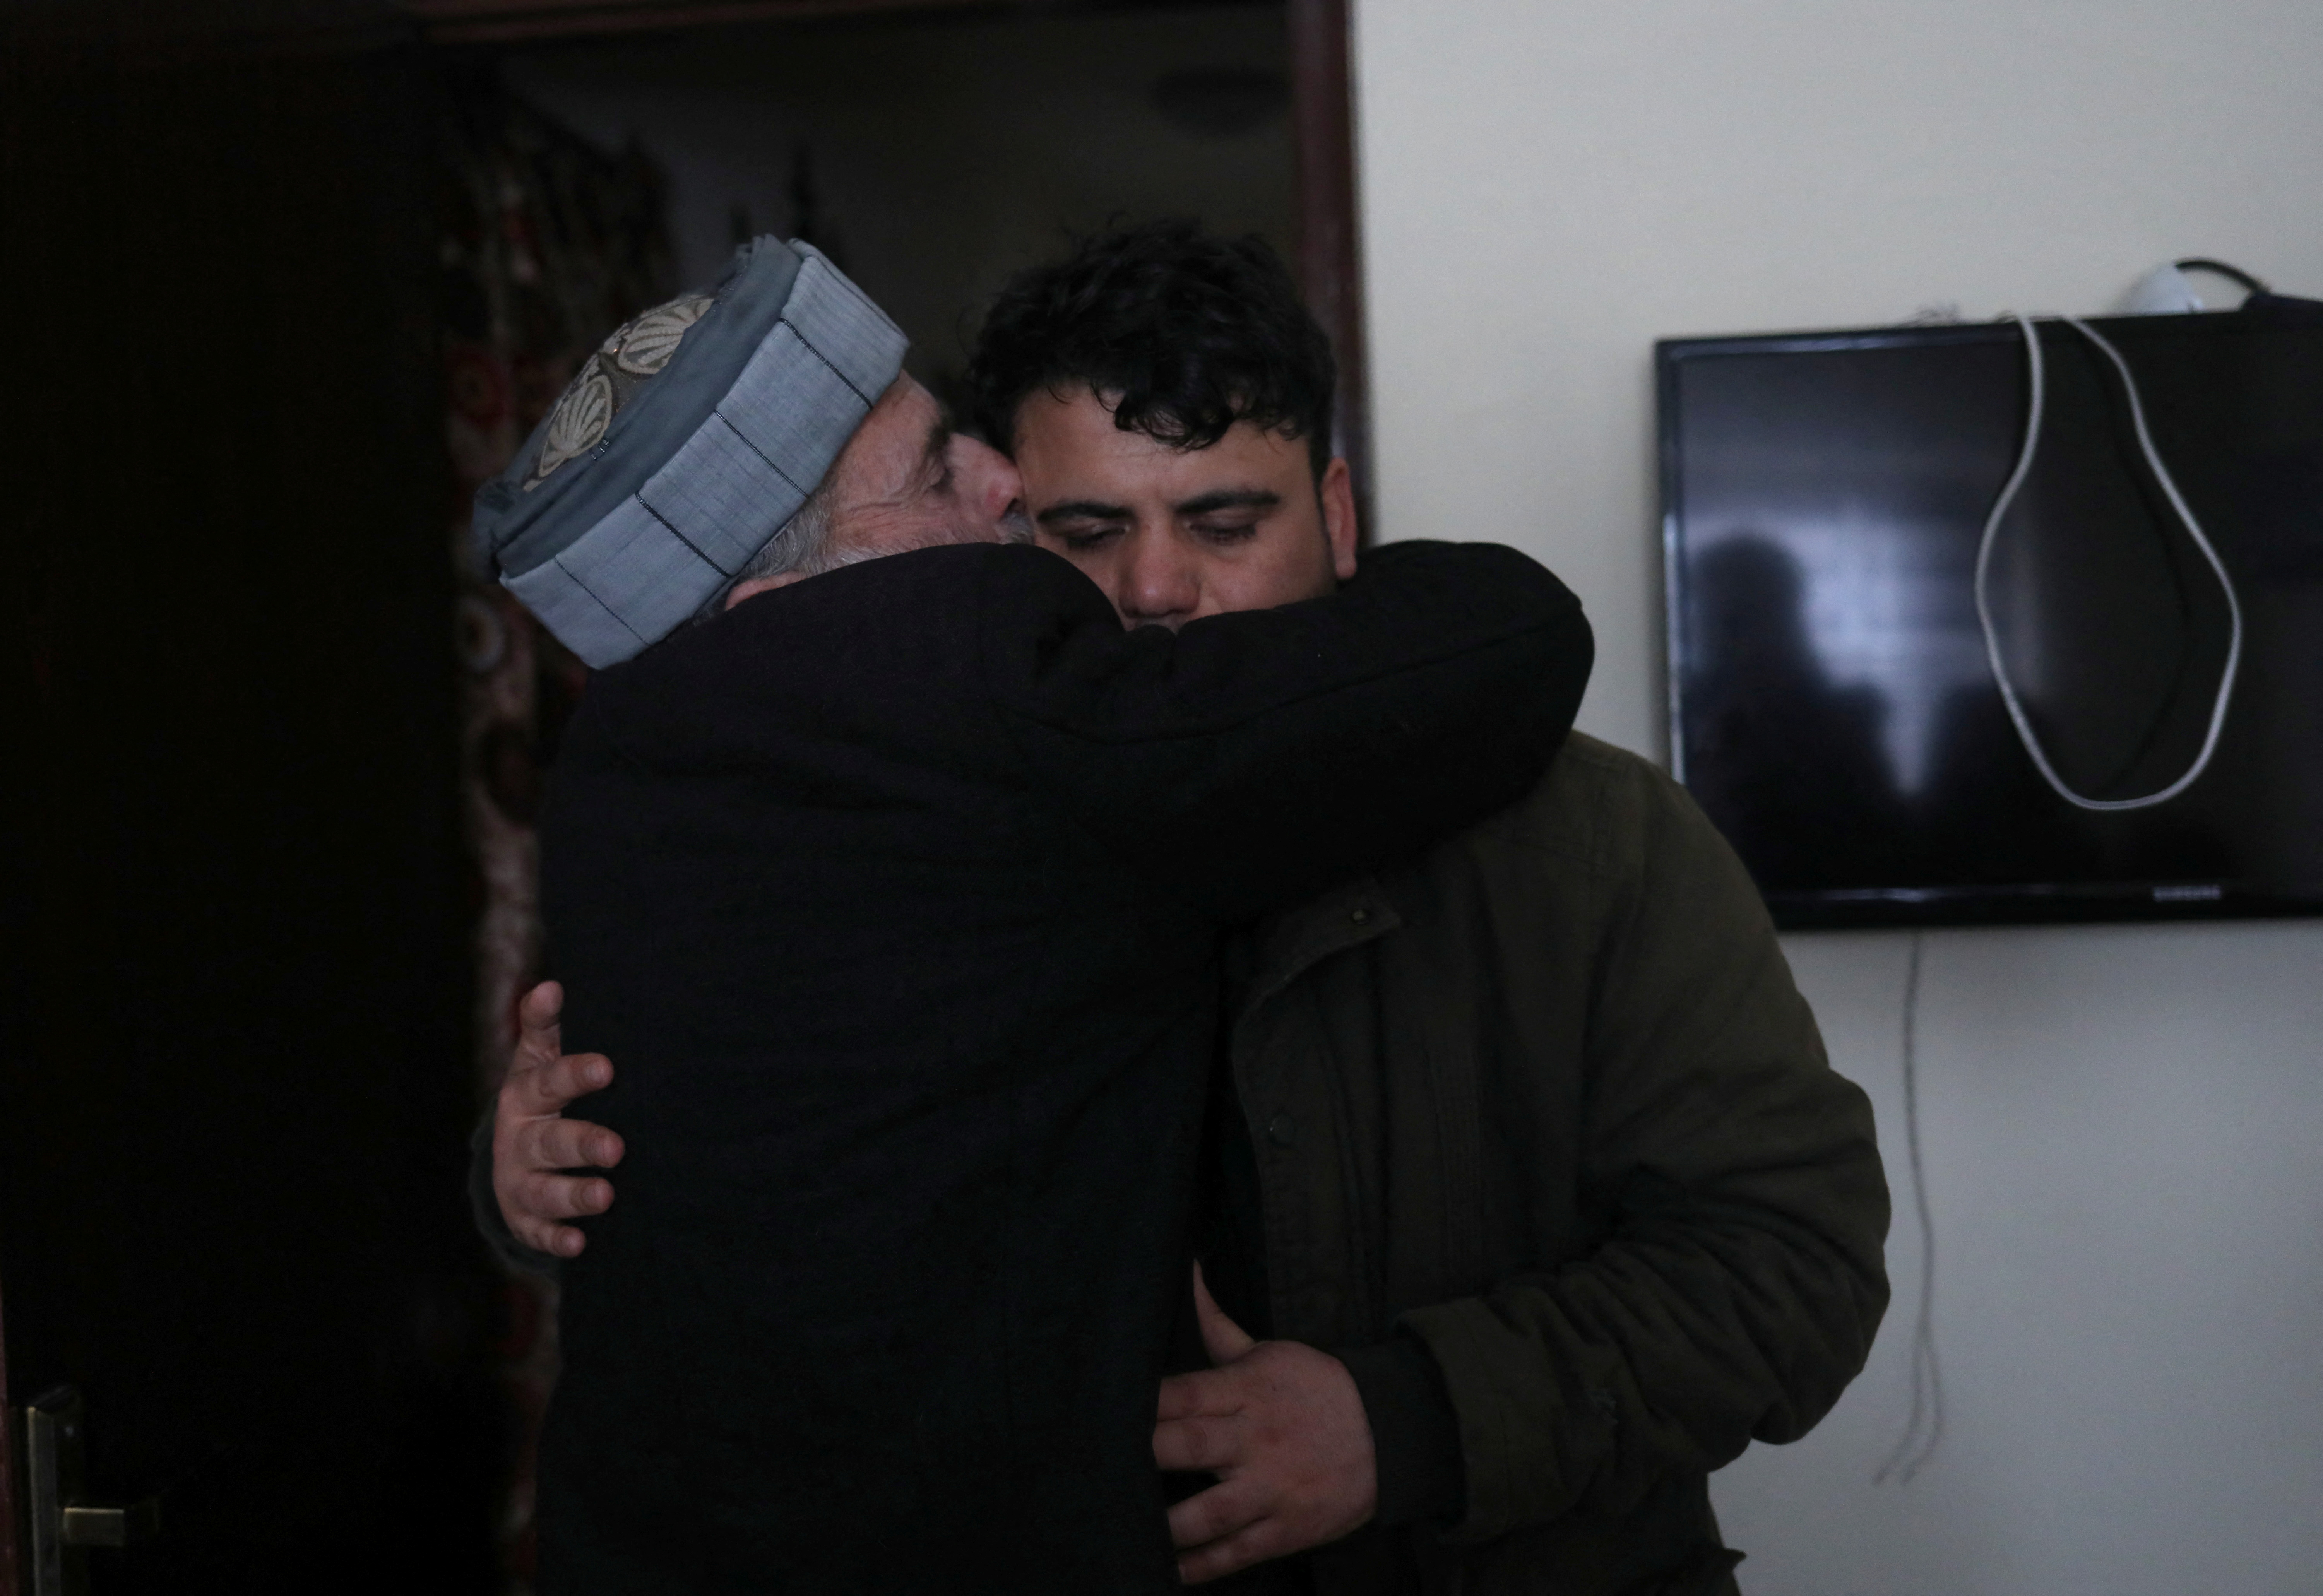 Hamid Safi, a 29-year-old taxi driver who had found baby Sohail Ahmadi in the airport, is kissed by Sohail's grandfather Mohammad Qasem Razawi at his home in Kabul